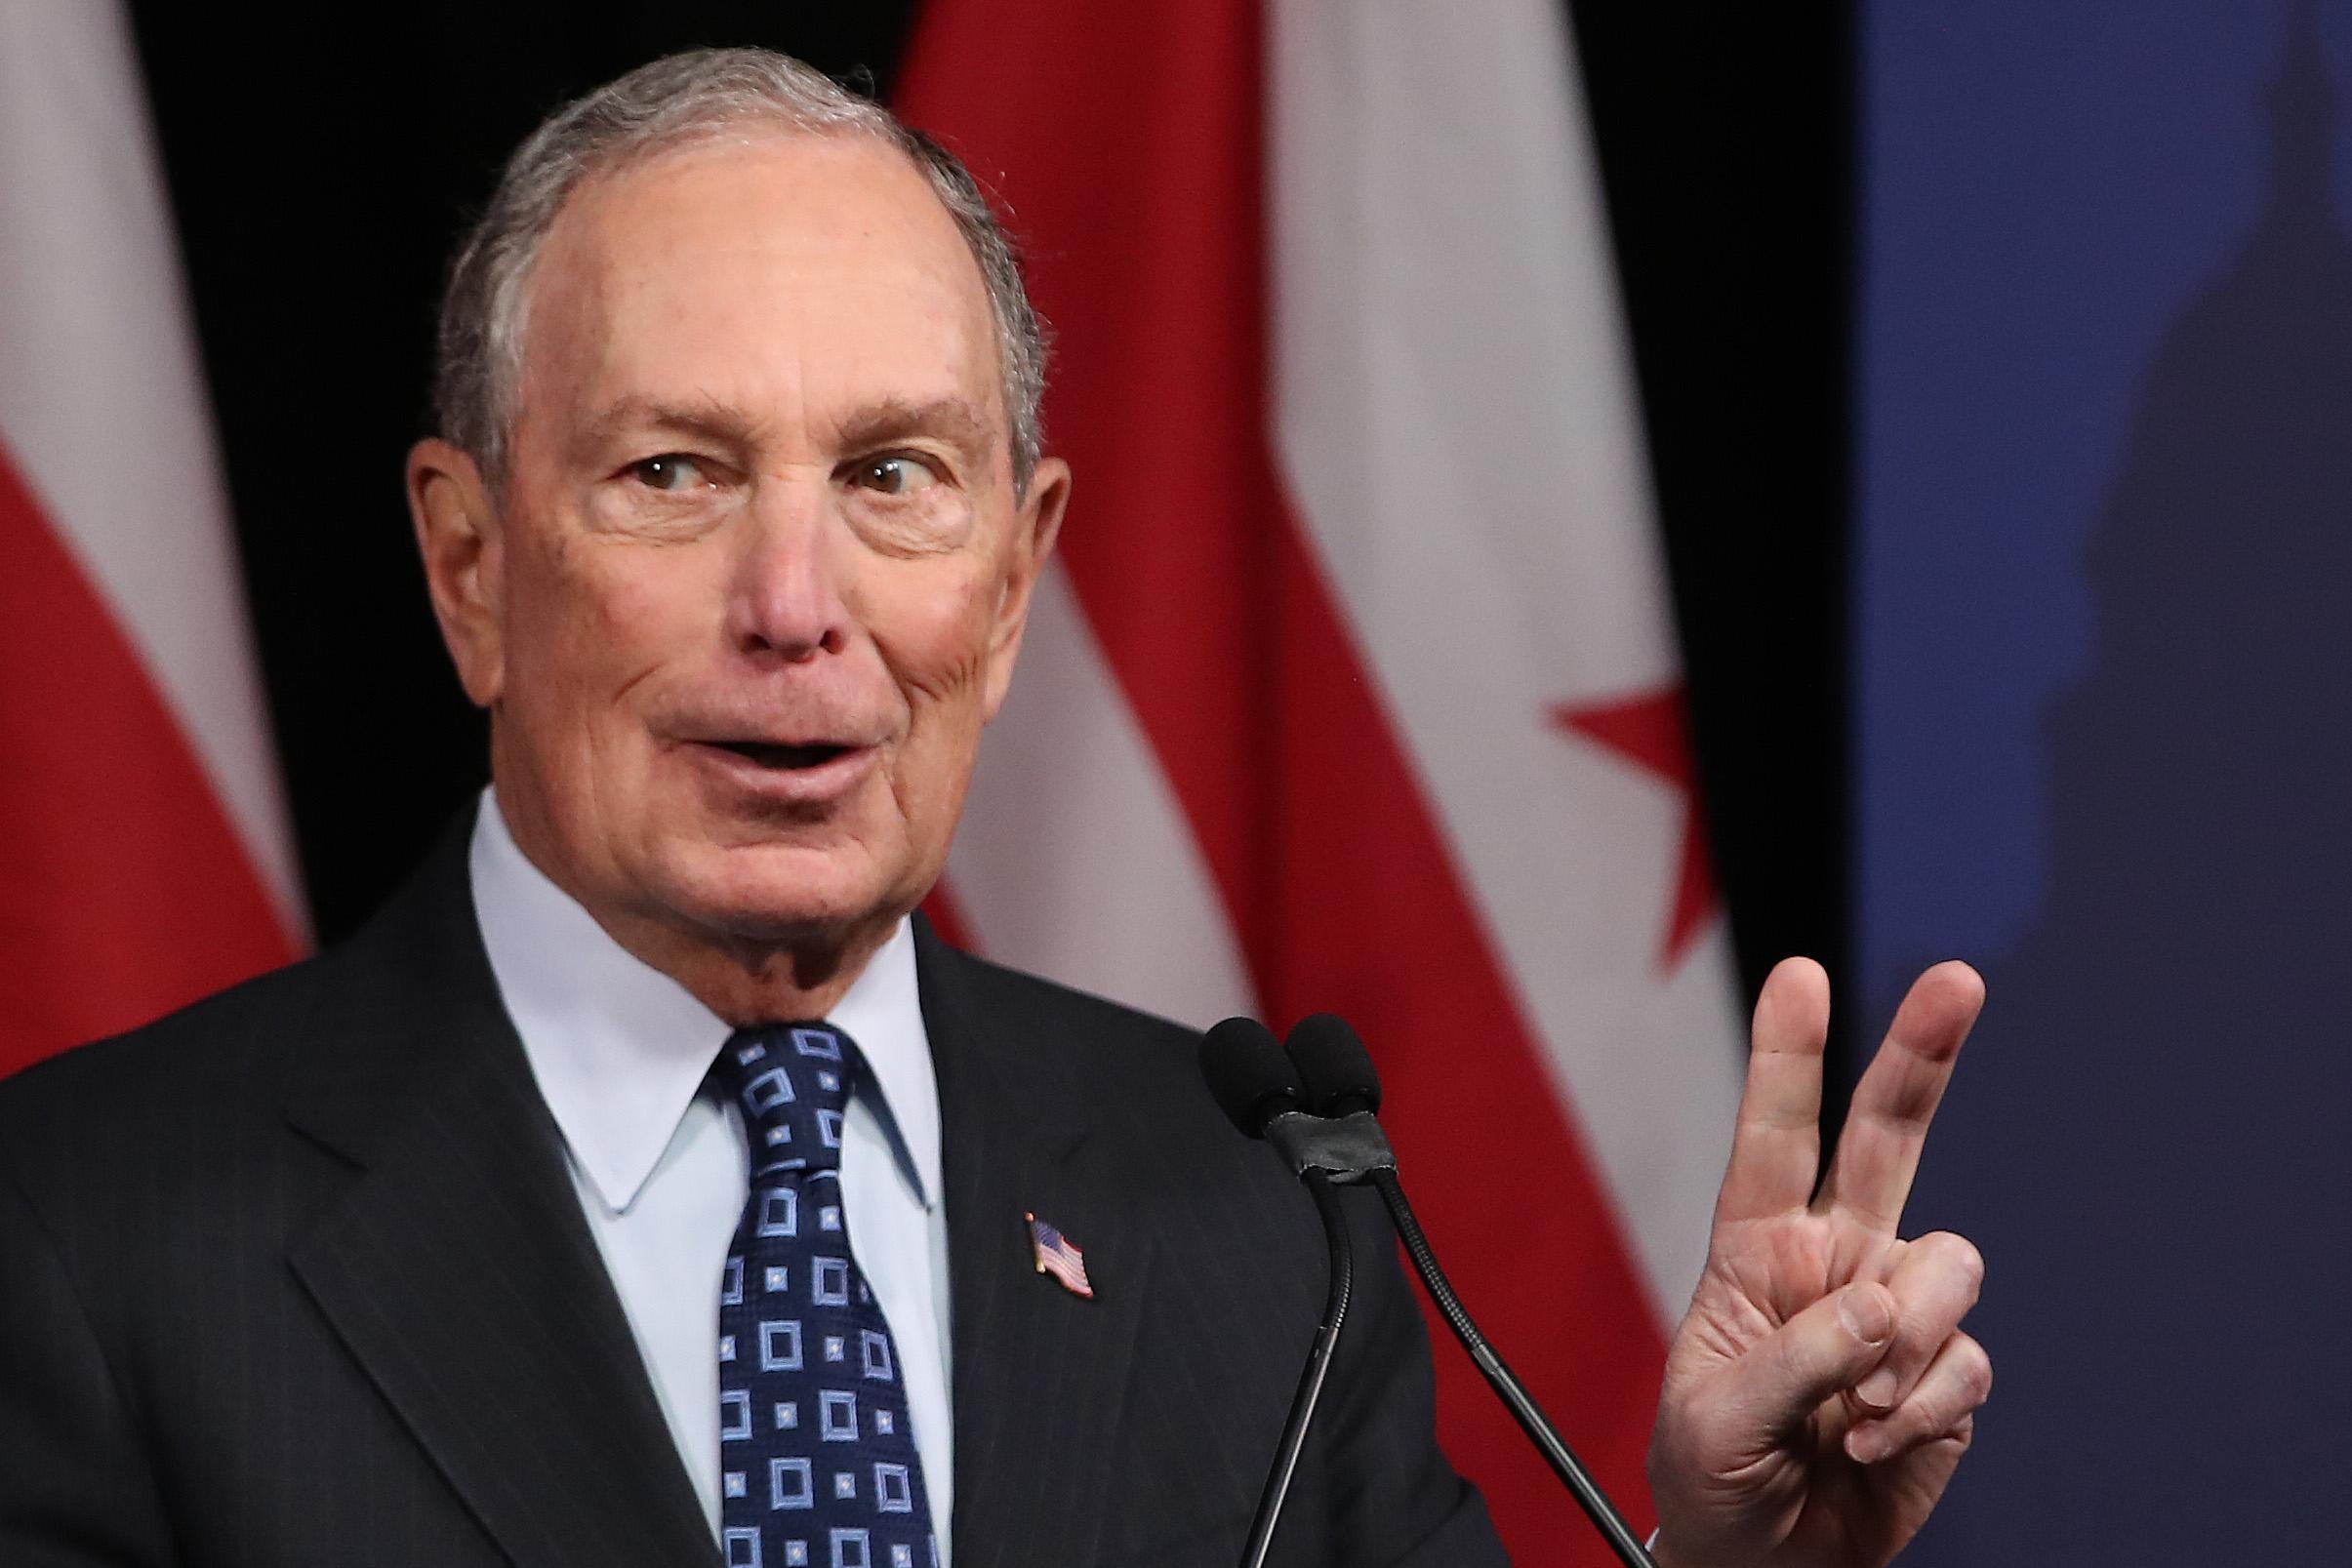 Michael Bloomberg stands in front of a microphone and flashes a peace sign.